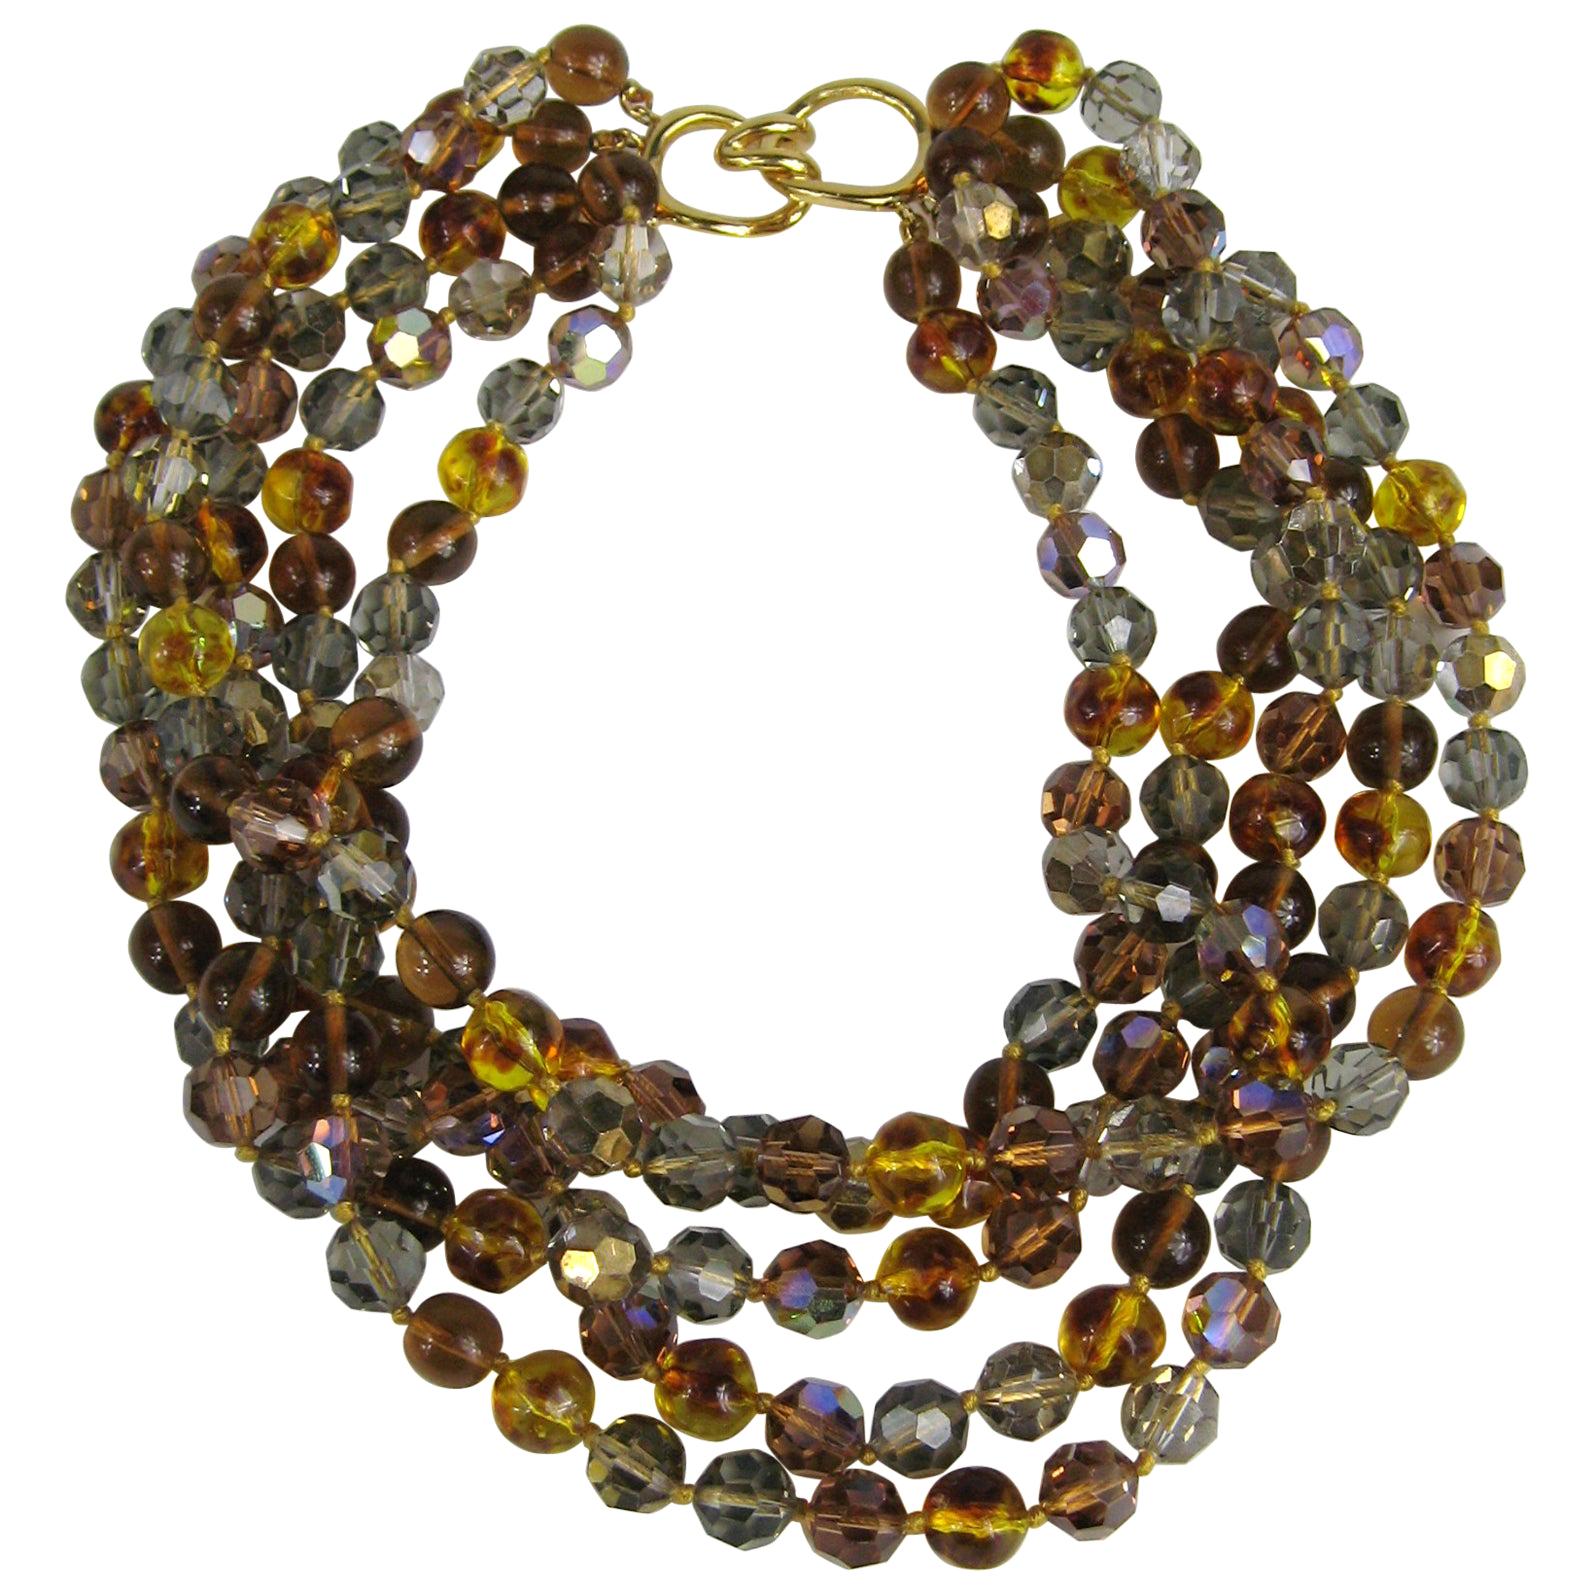  Ciner Ombre Multi strand Bead Necklace 1980s New, Never Worn For Sale